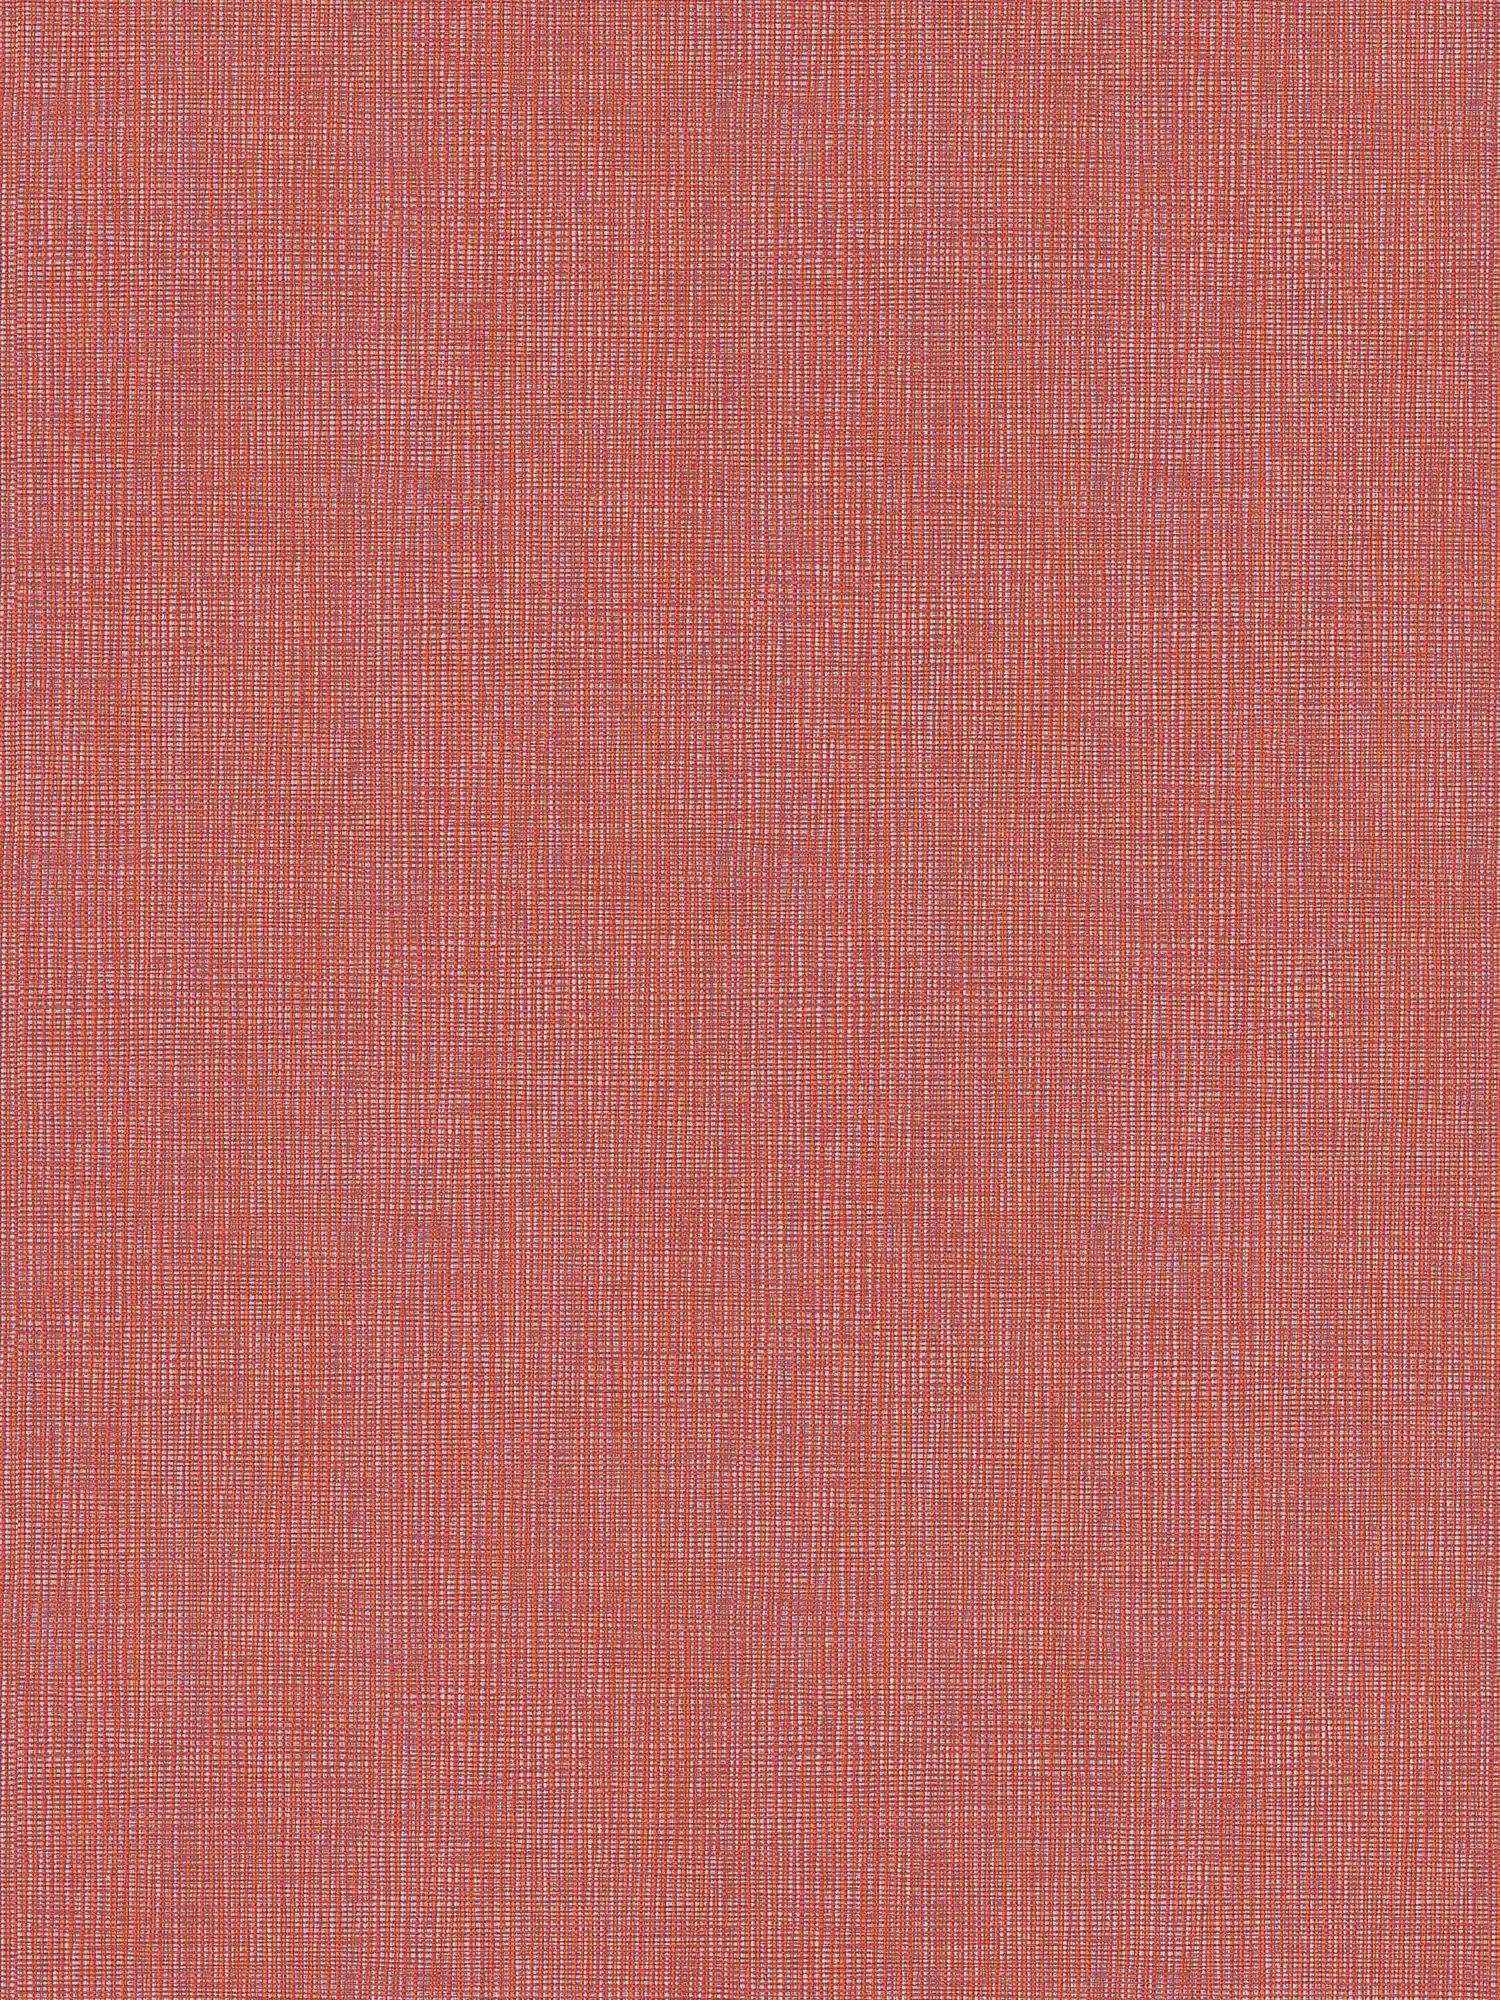 Tapete Rot mit Textil-Muster in Rot Orange & Lila
